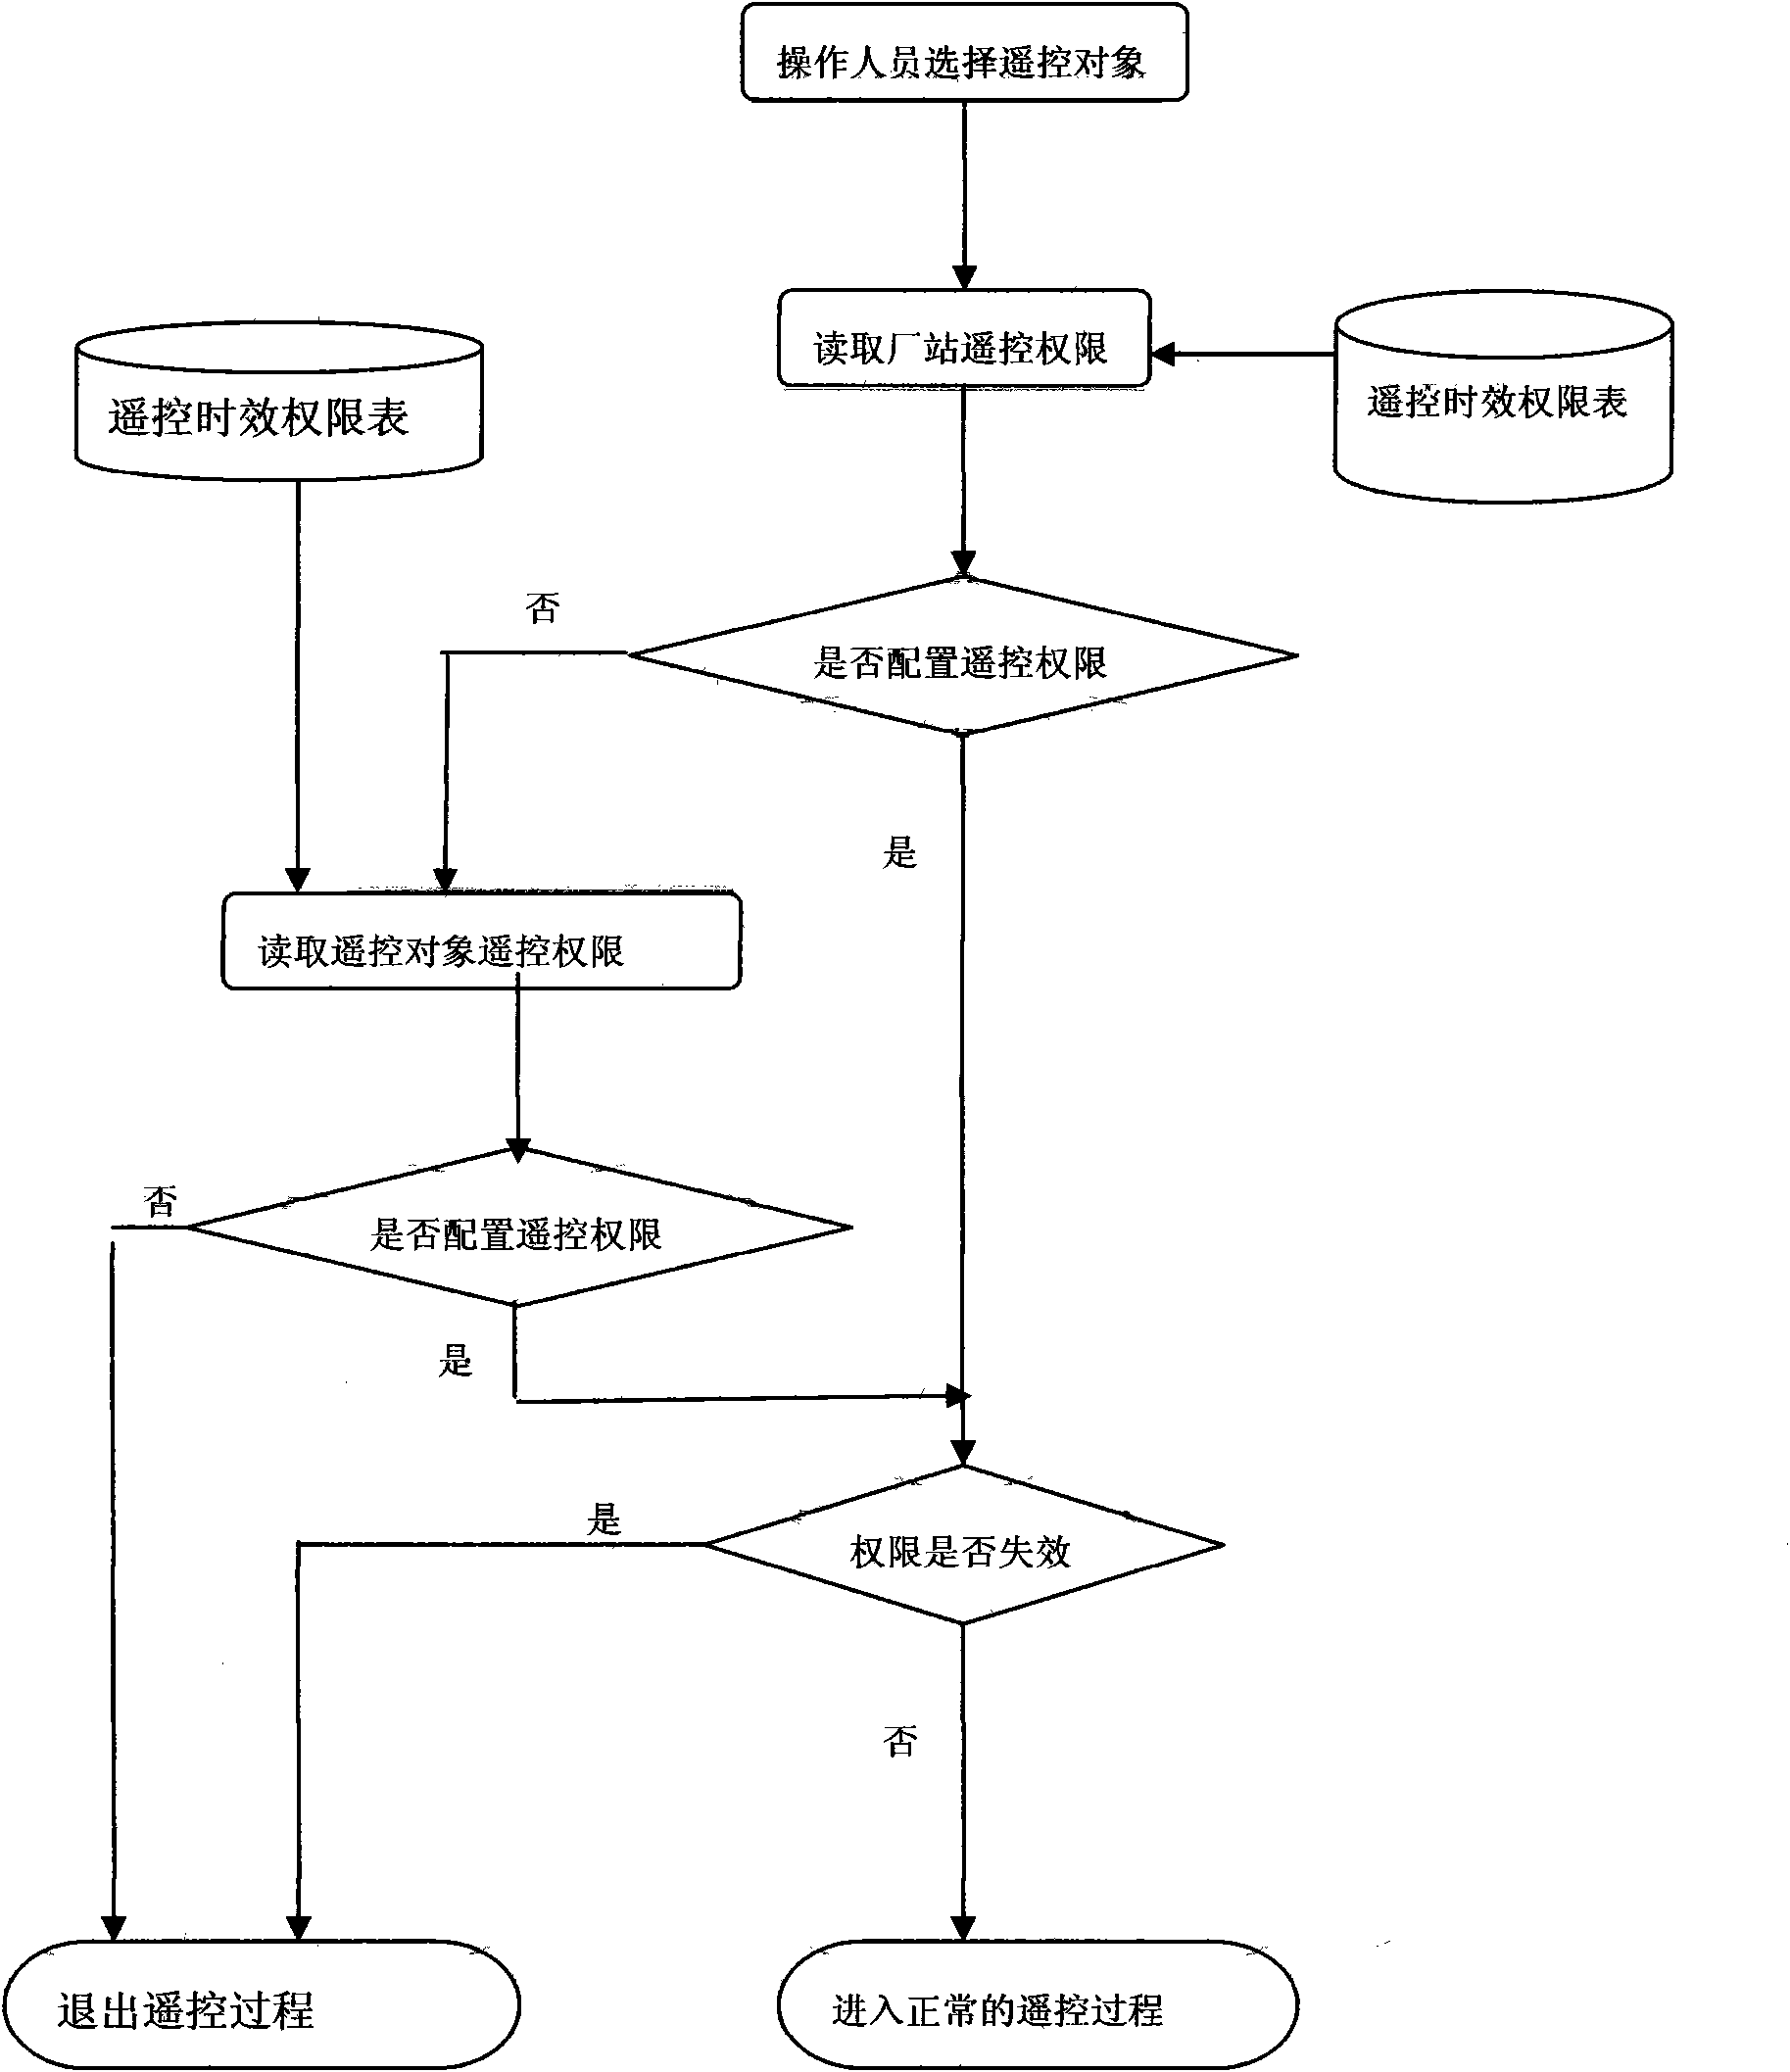 Anti-misoperation method for automation personnel in electric power system